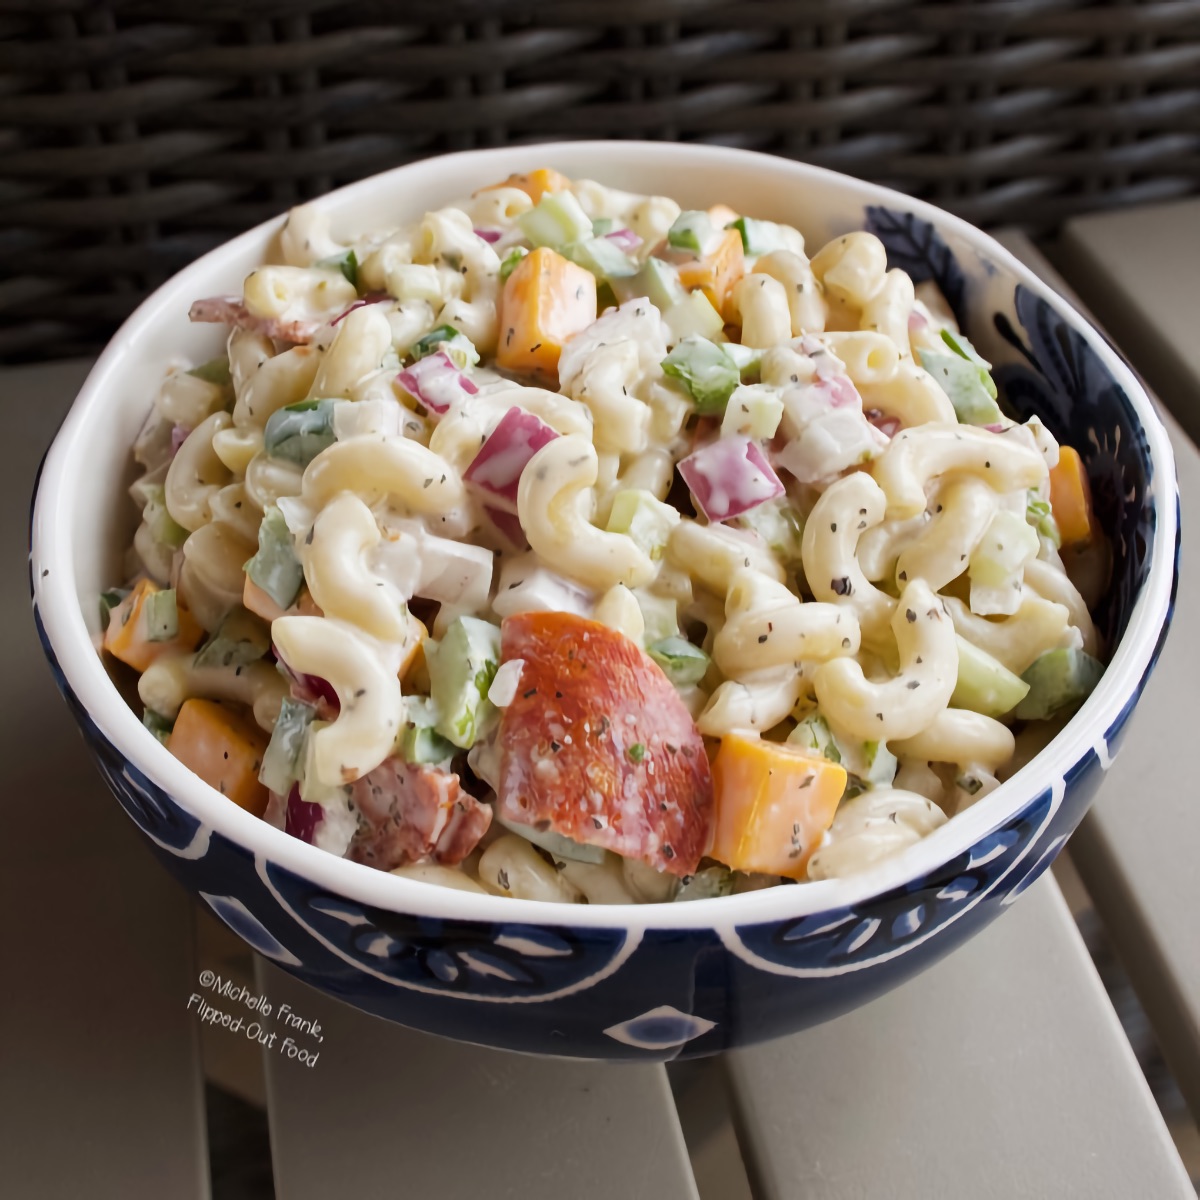 Top view of creamy pasta salad in a blue and white bowl.